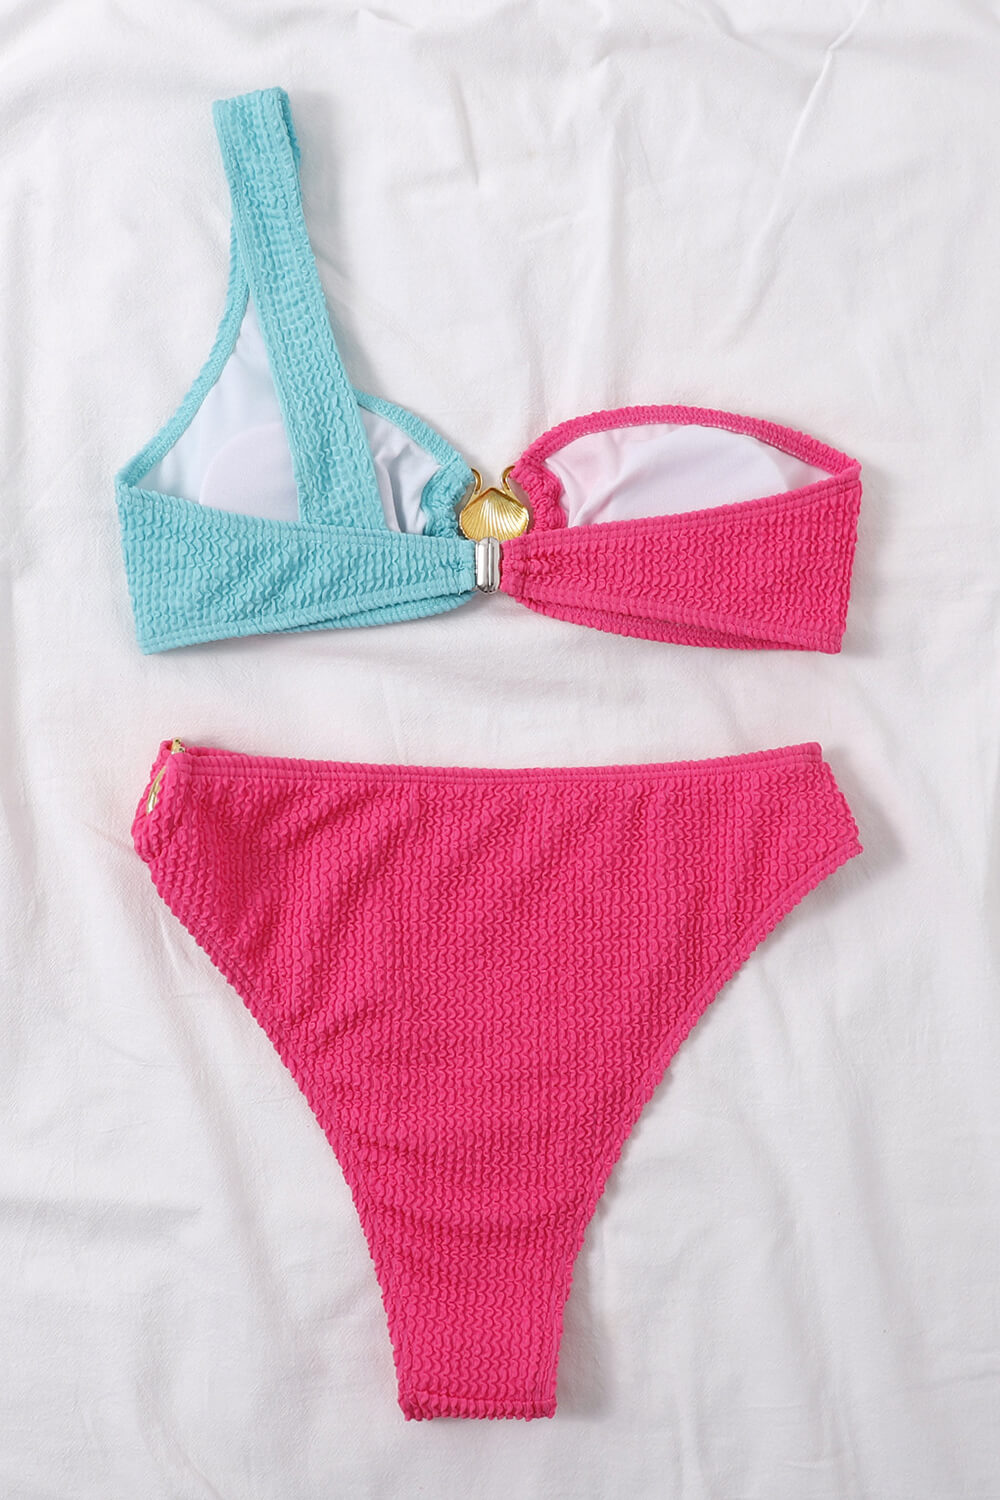 Color Block Crinkle One Shoulder High Waisted Bikini Set With Gold Shell Detail - Blue & Mint/Lime & Yellow/Black/Hot Pink & Blue/Coral & Hot Pink